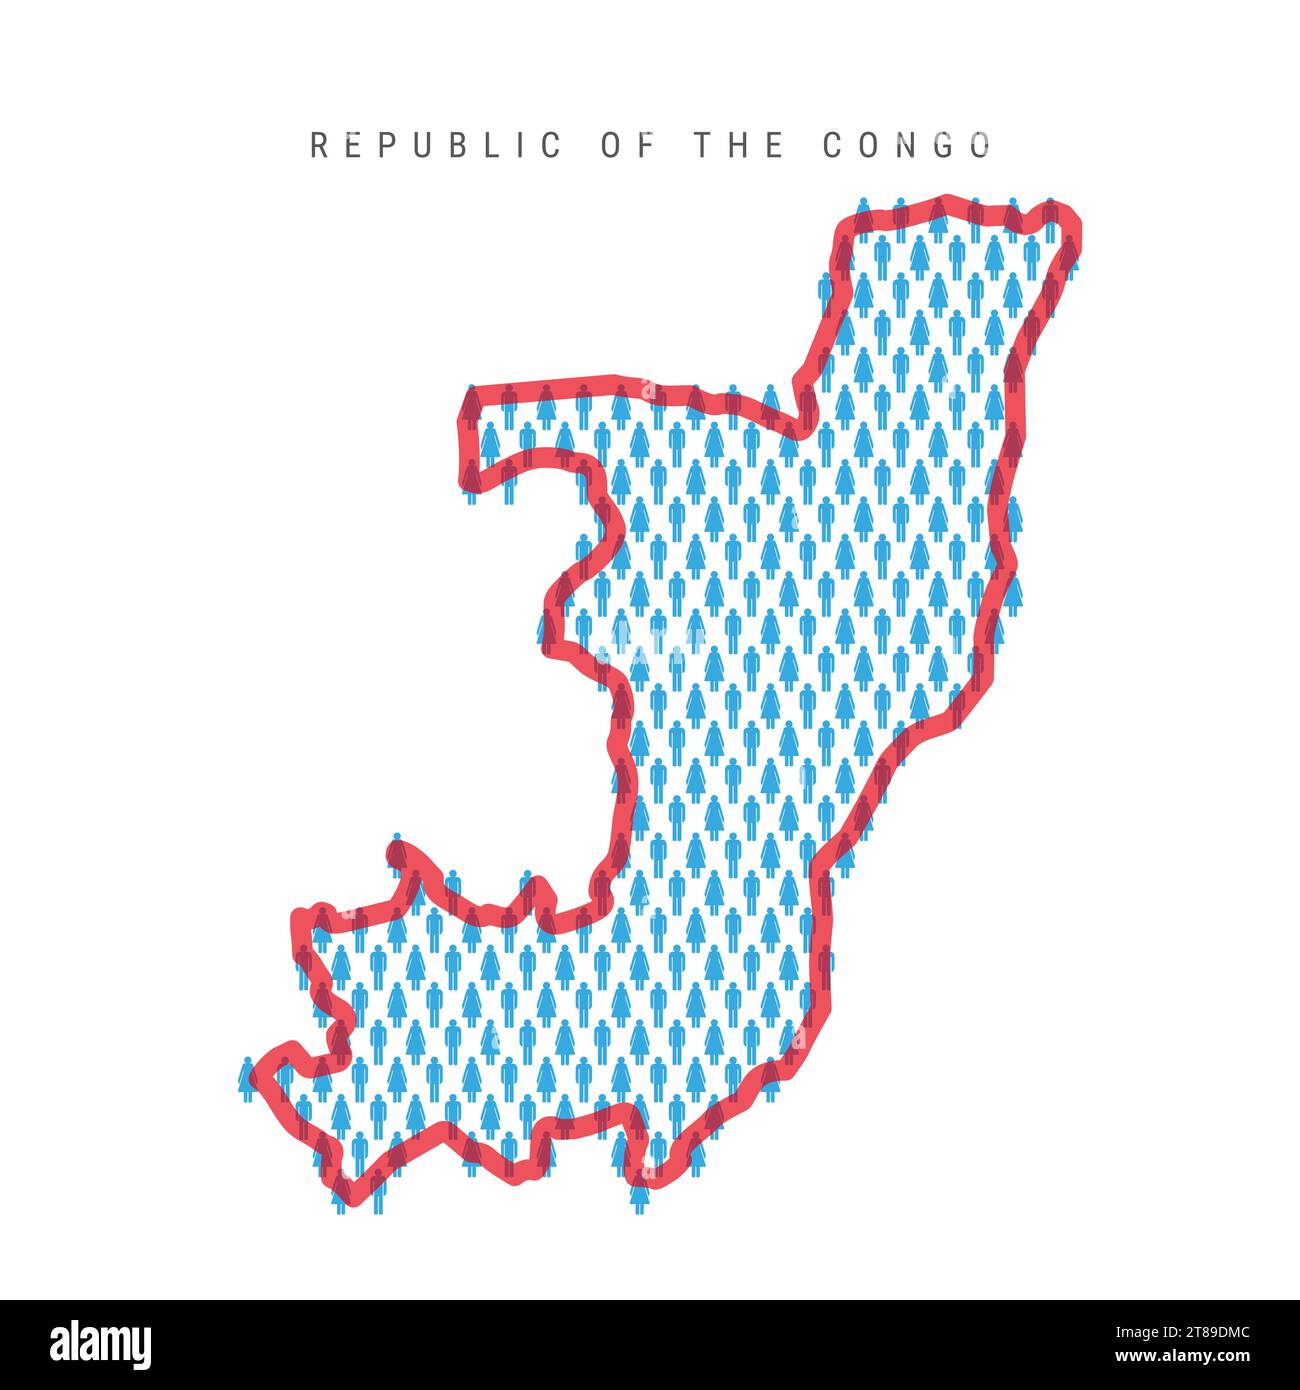 Republic of the Congo population map. Stick figures Congolese people map with bold red translucent country border. Pattern of men and women icons. Iso Stock Vector